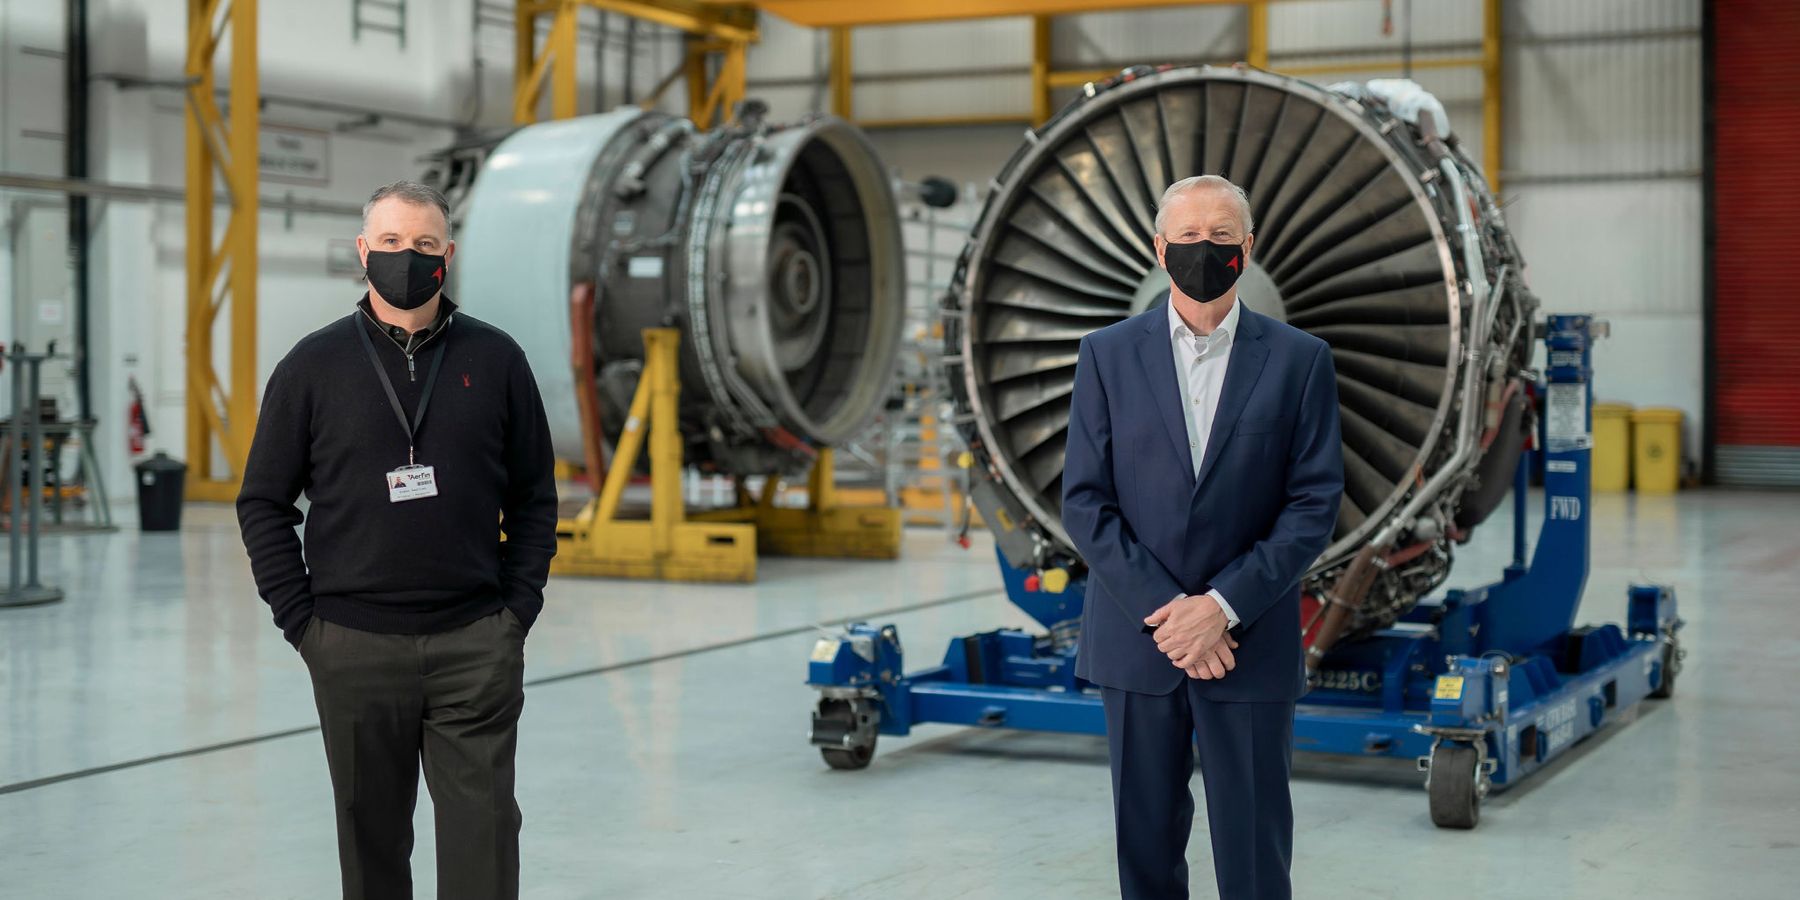 Aerfin staff standing in front of airplane engines in their HQ 